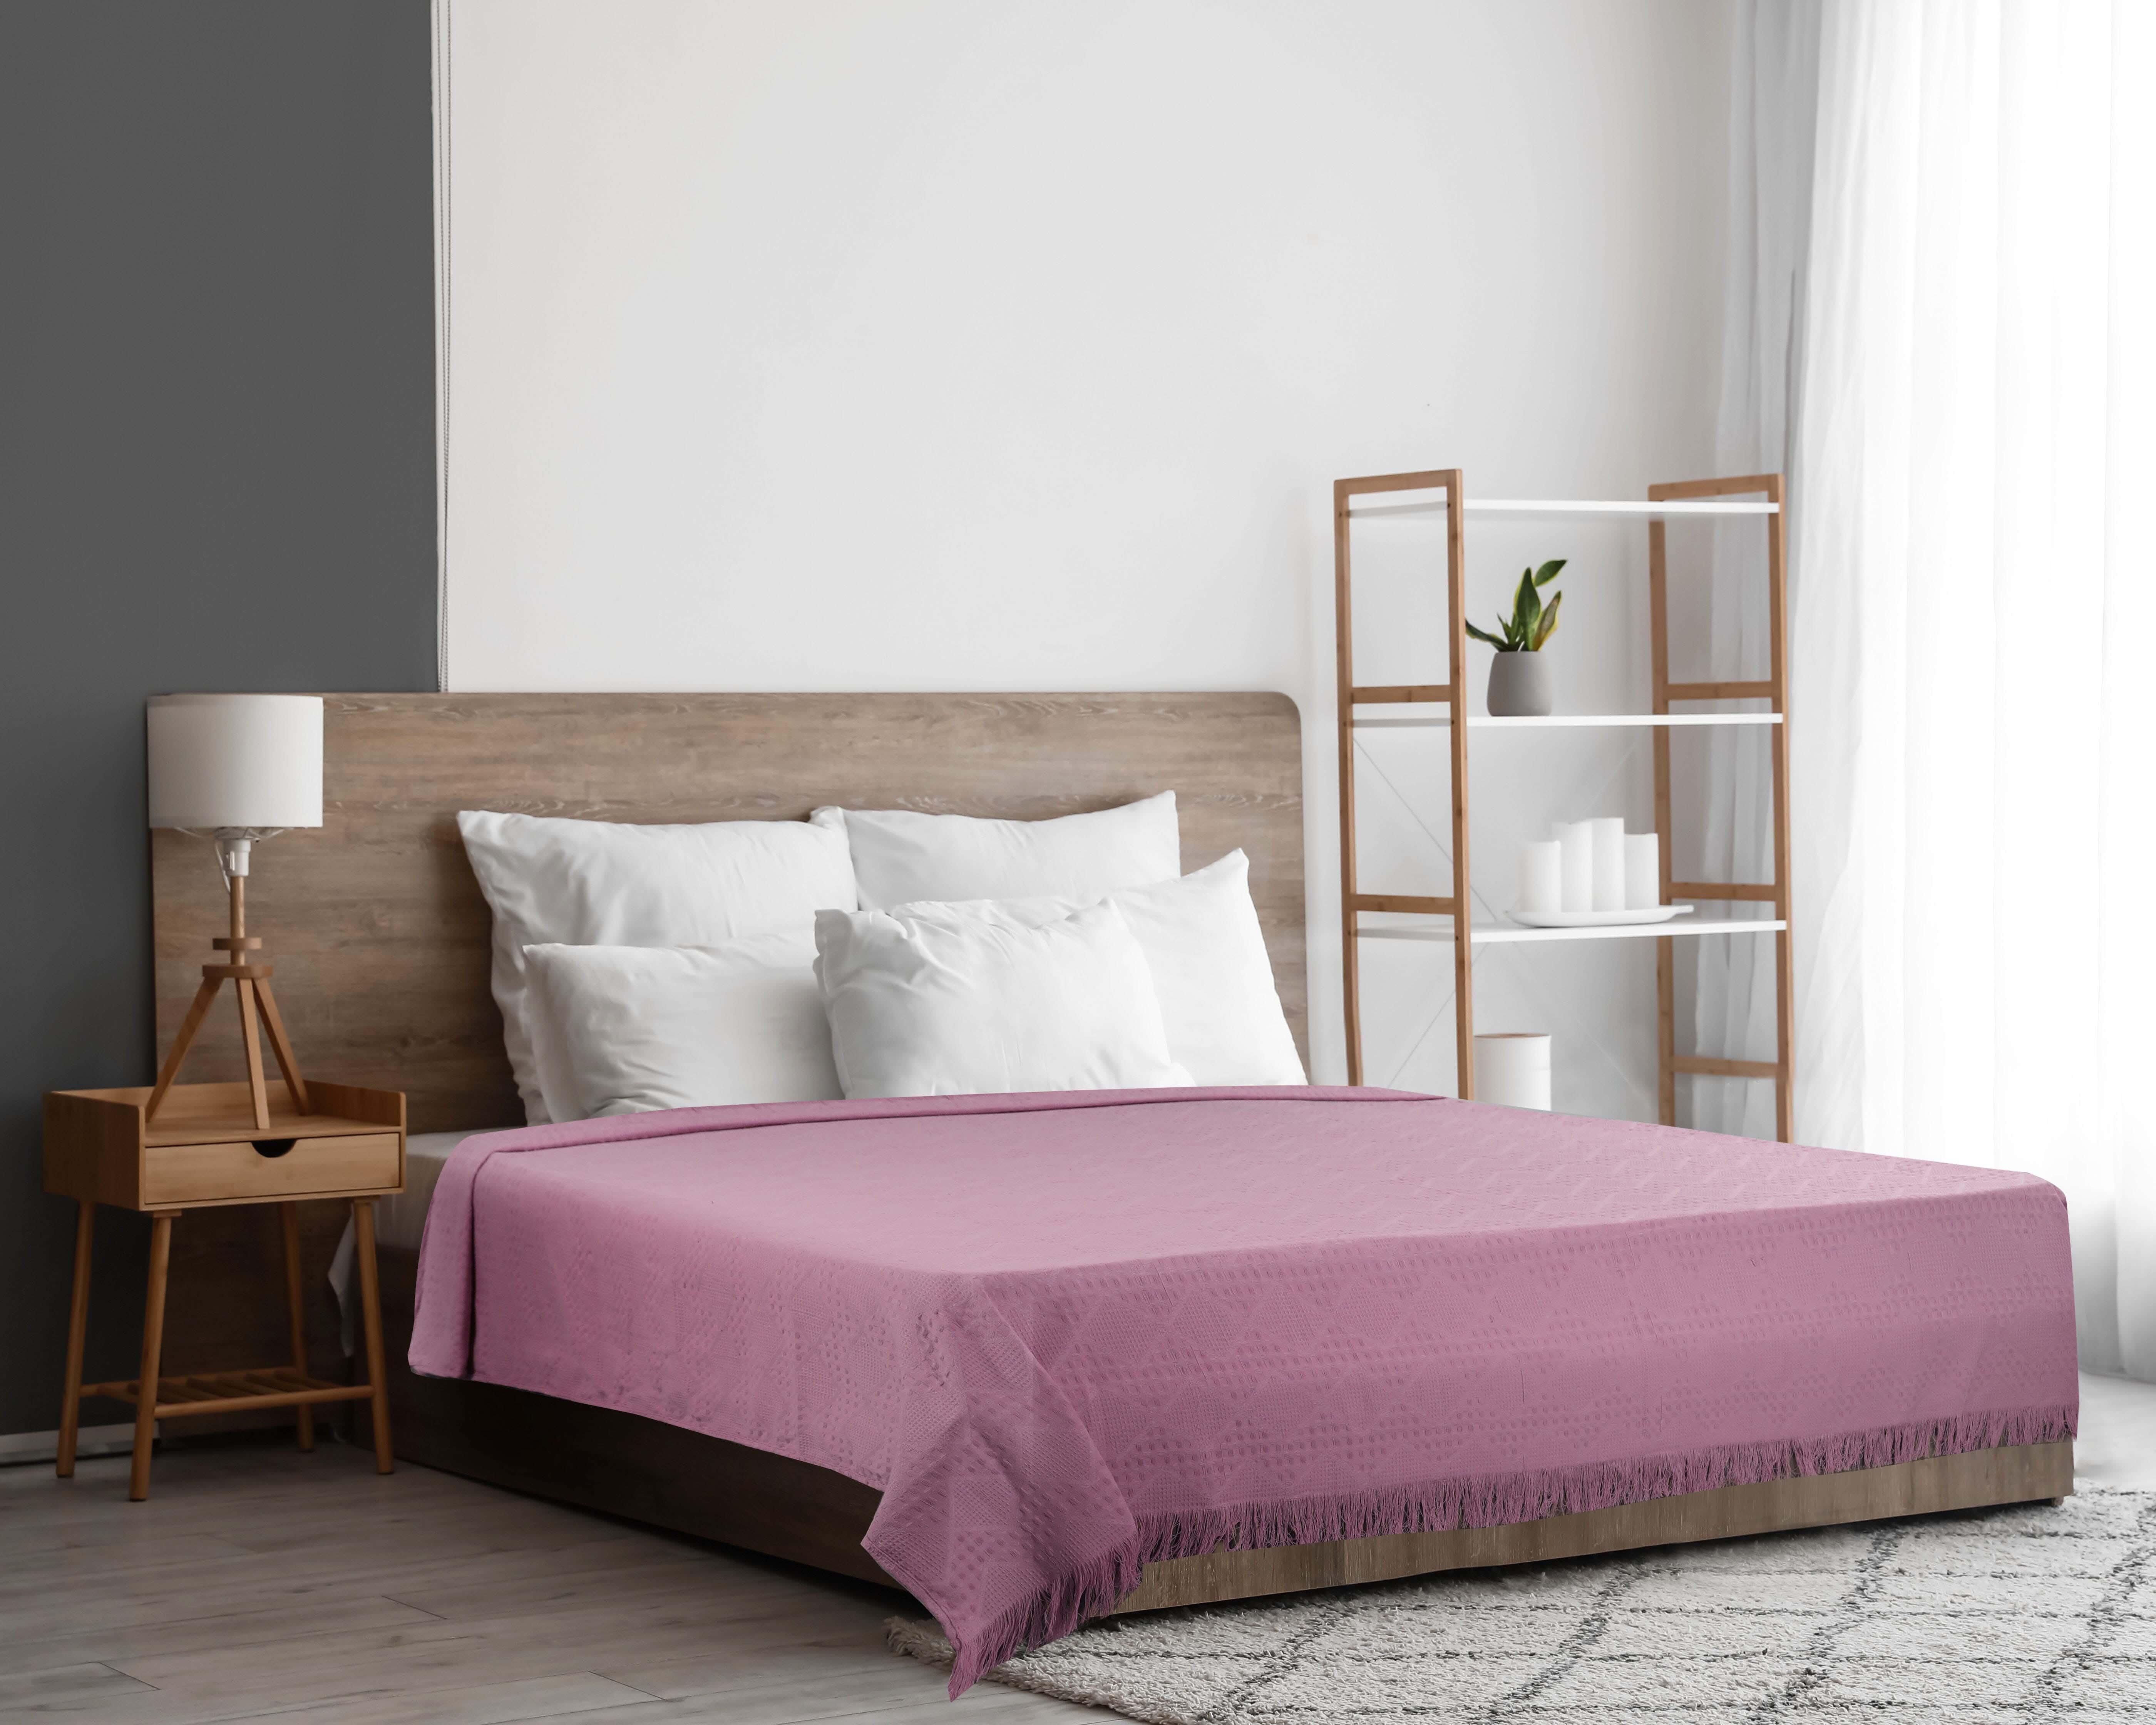 Get Yara Cotton Comforter Set with Tassels and Sheet, 4 Pieces, 220×240 cm - Purple White with best offers | Raneen.com